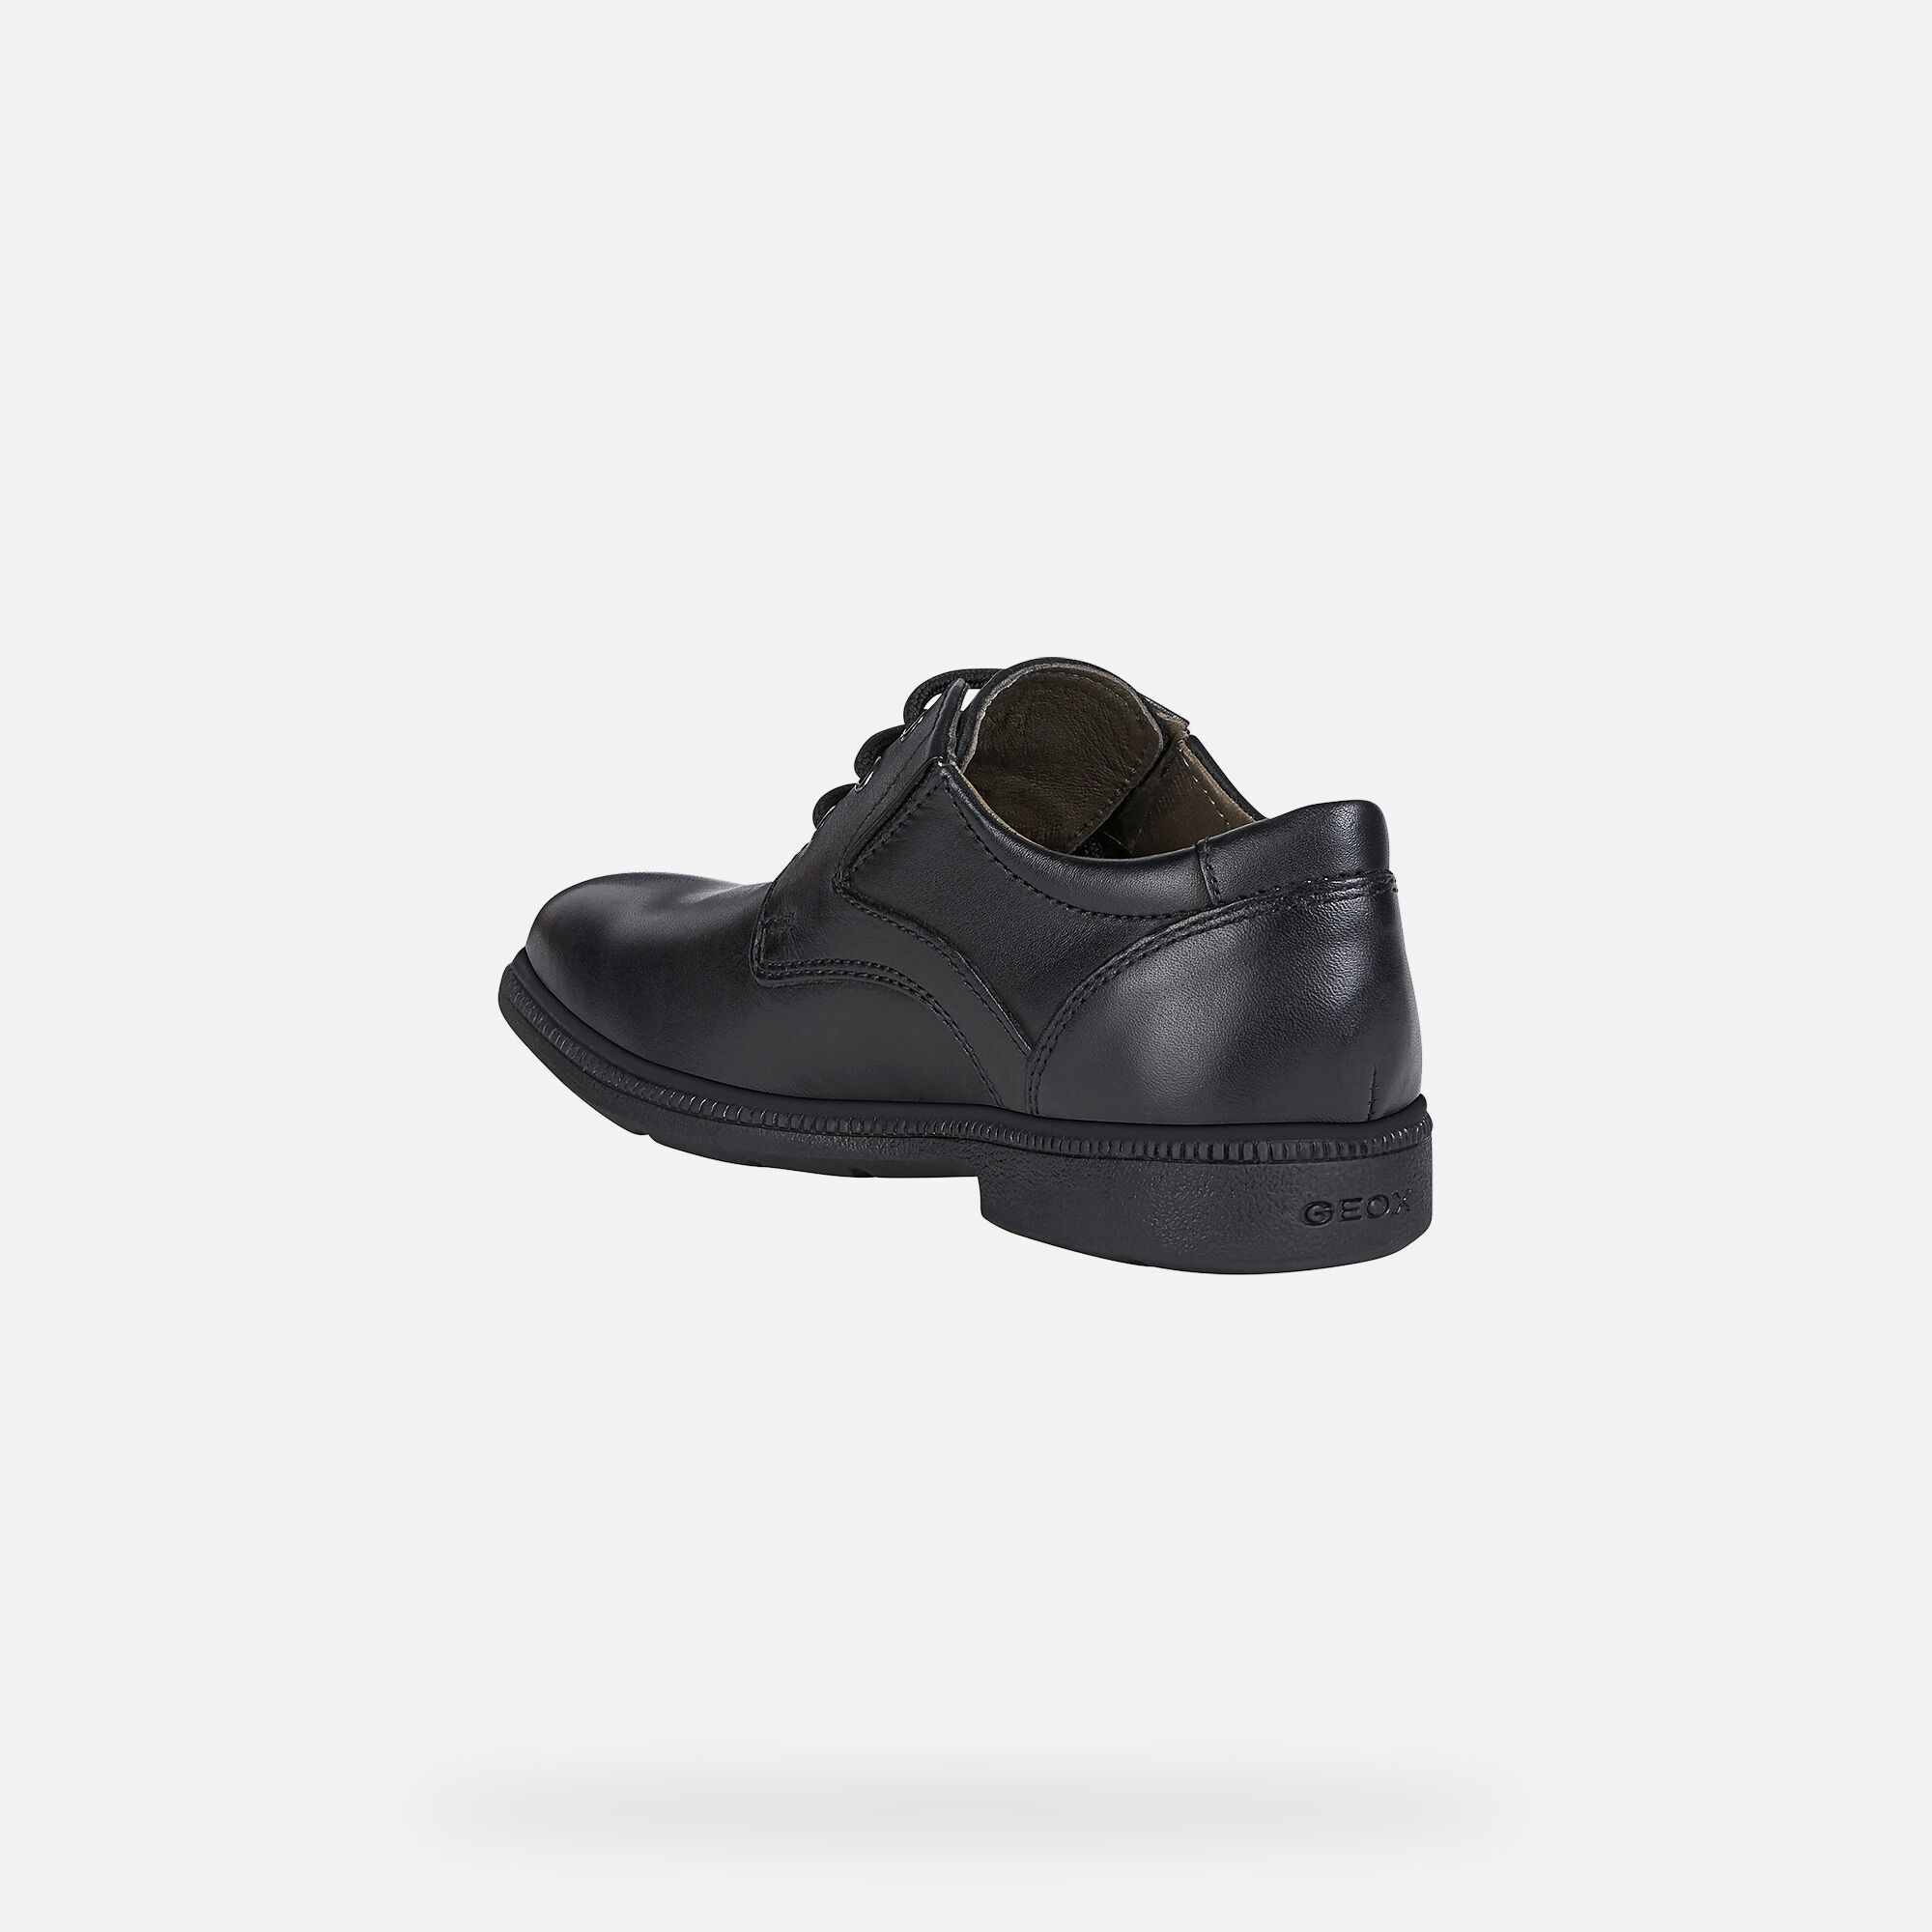 geox federico laced shoes black